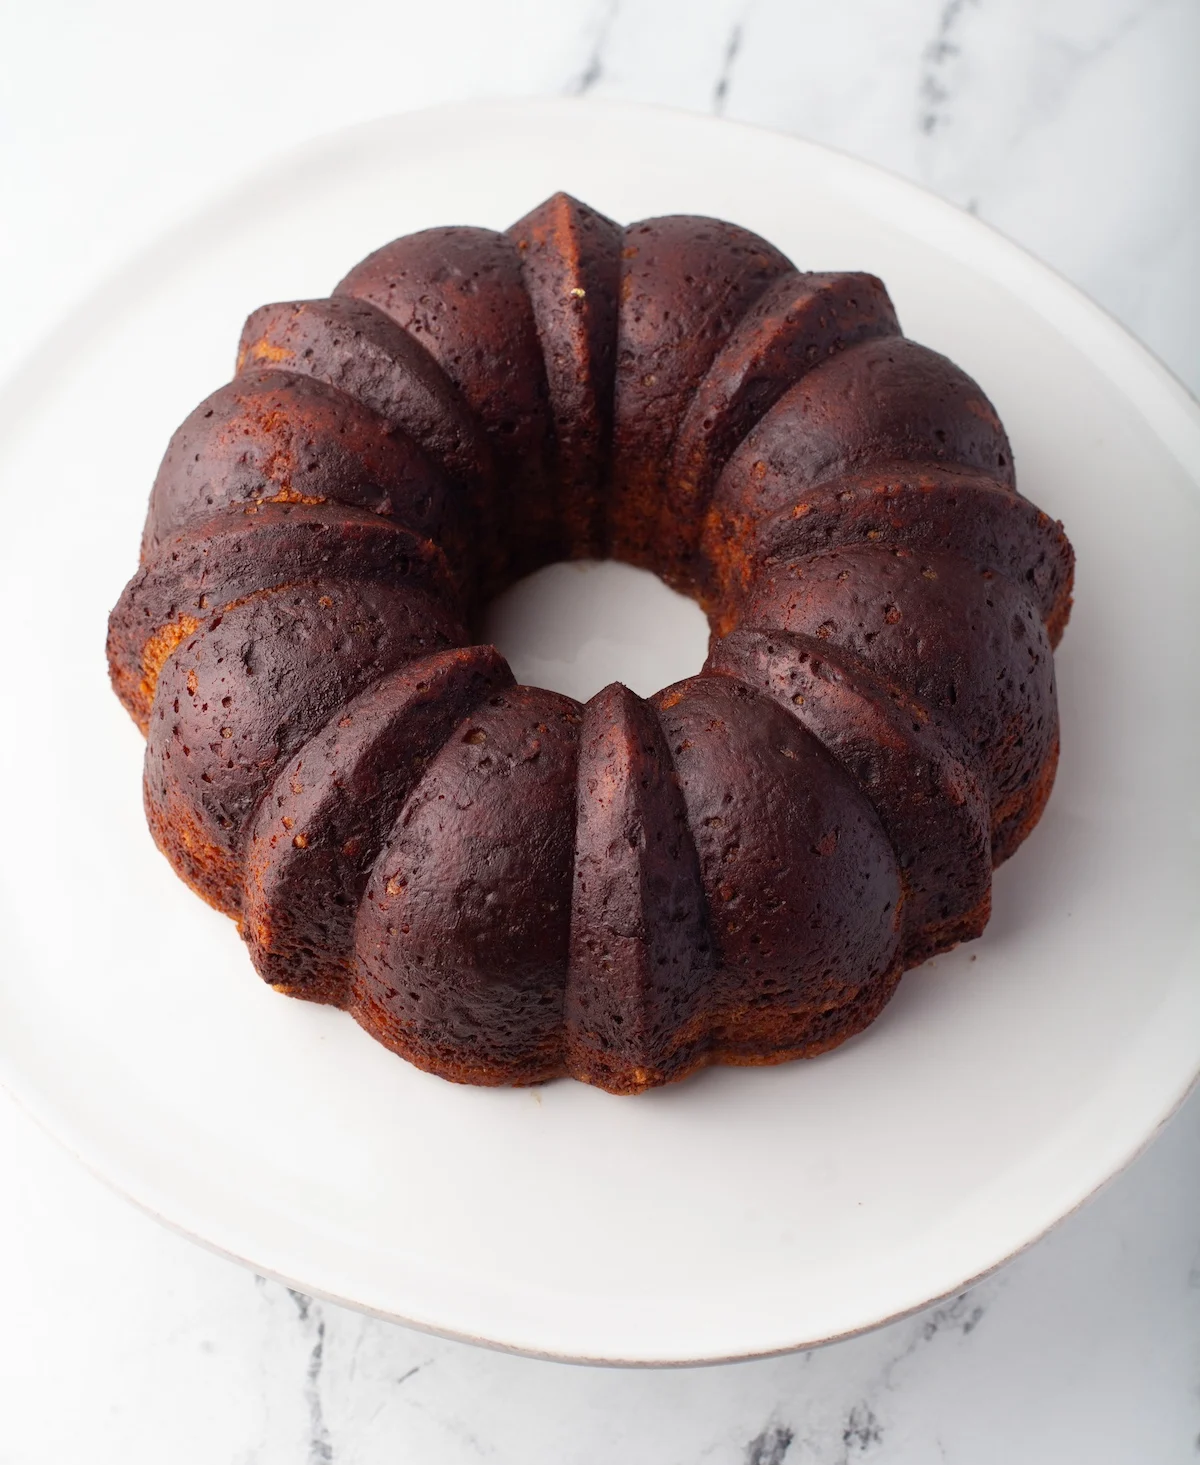 Bundt cake flipped onto a plate and cooling